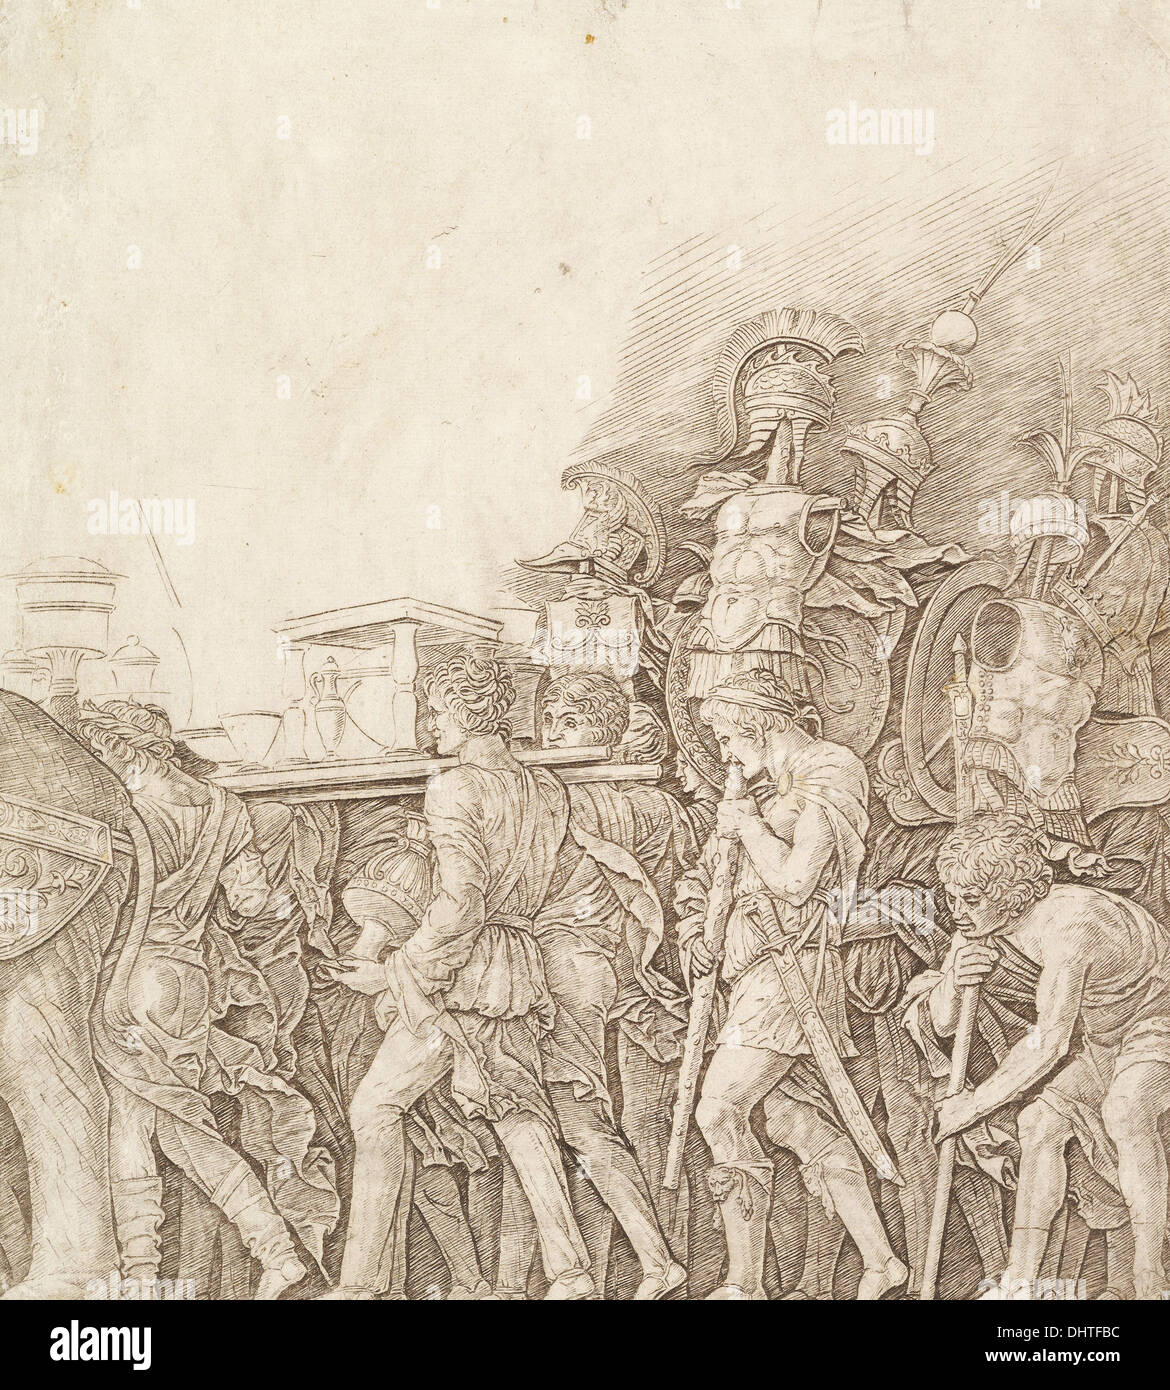 Triumph of Caesar: Soldiers carrying Trophies - Engraving by School of Andrea Mantegna 1490 Stock Photo